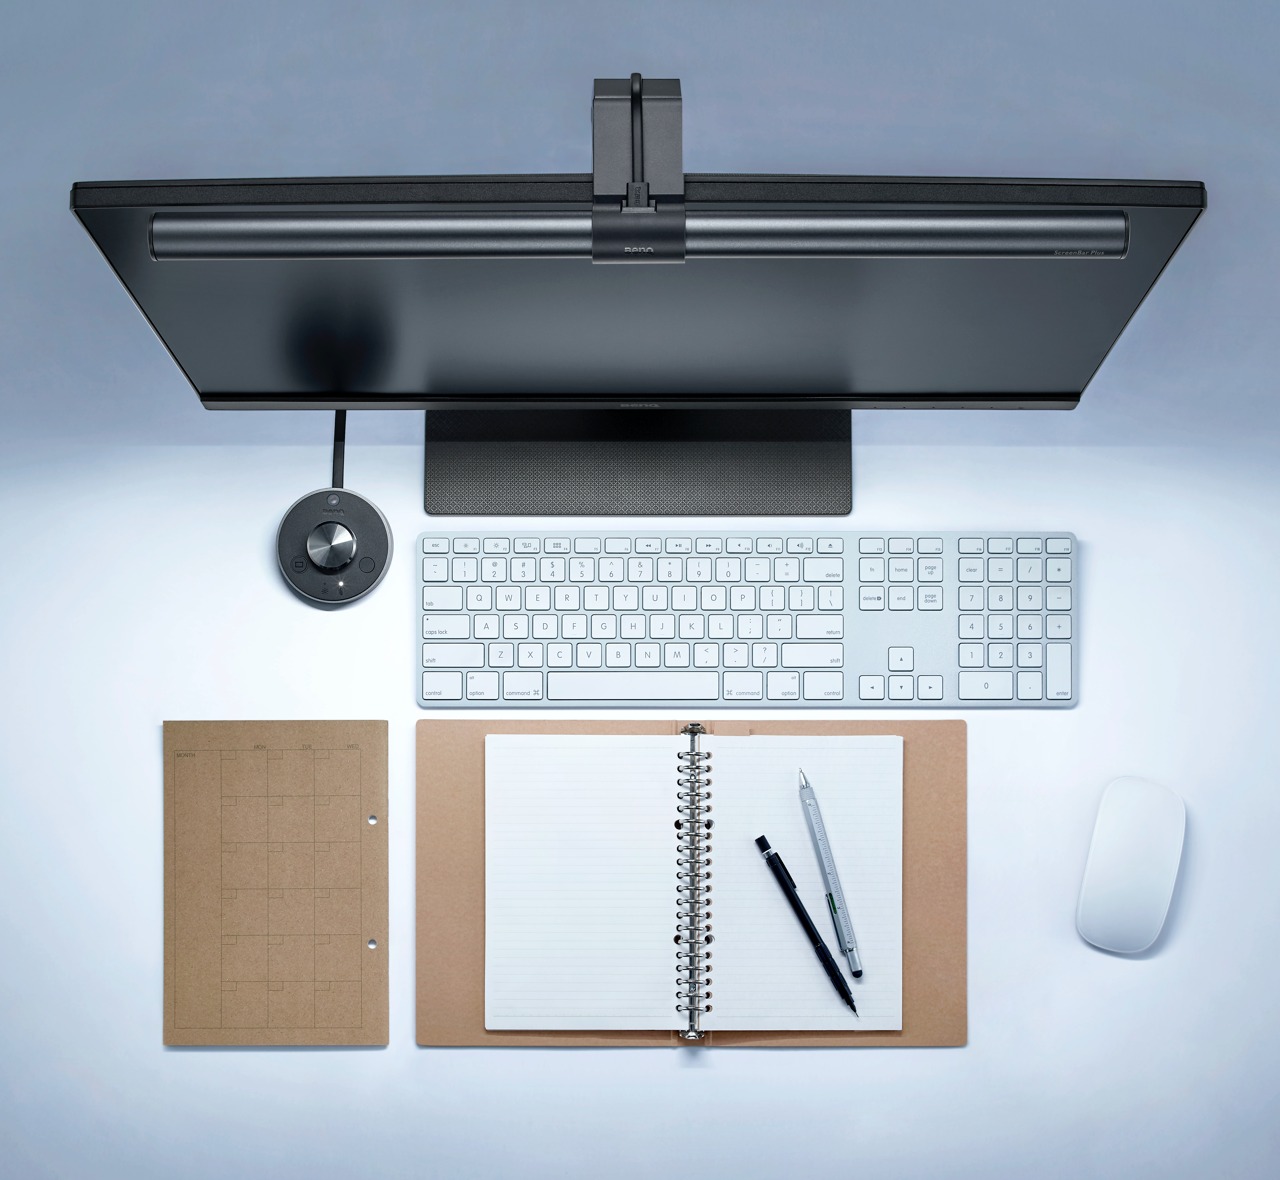 This Monitor Light Bar Is The Most Important Desk Accessory Nobody Ever Talks About Yanko Design